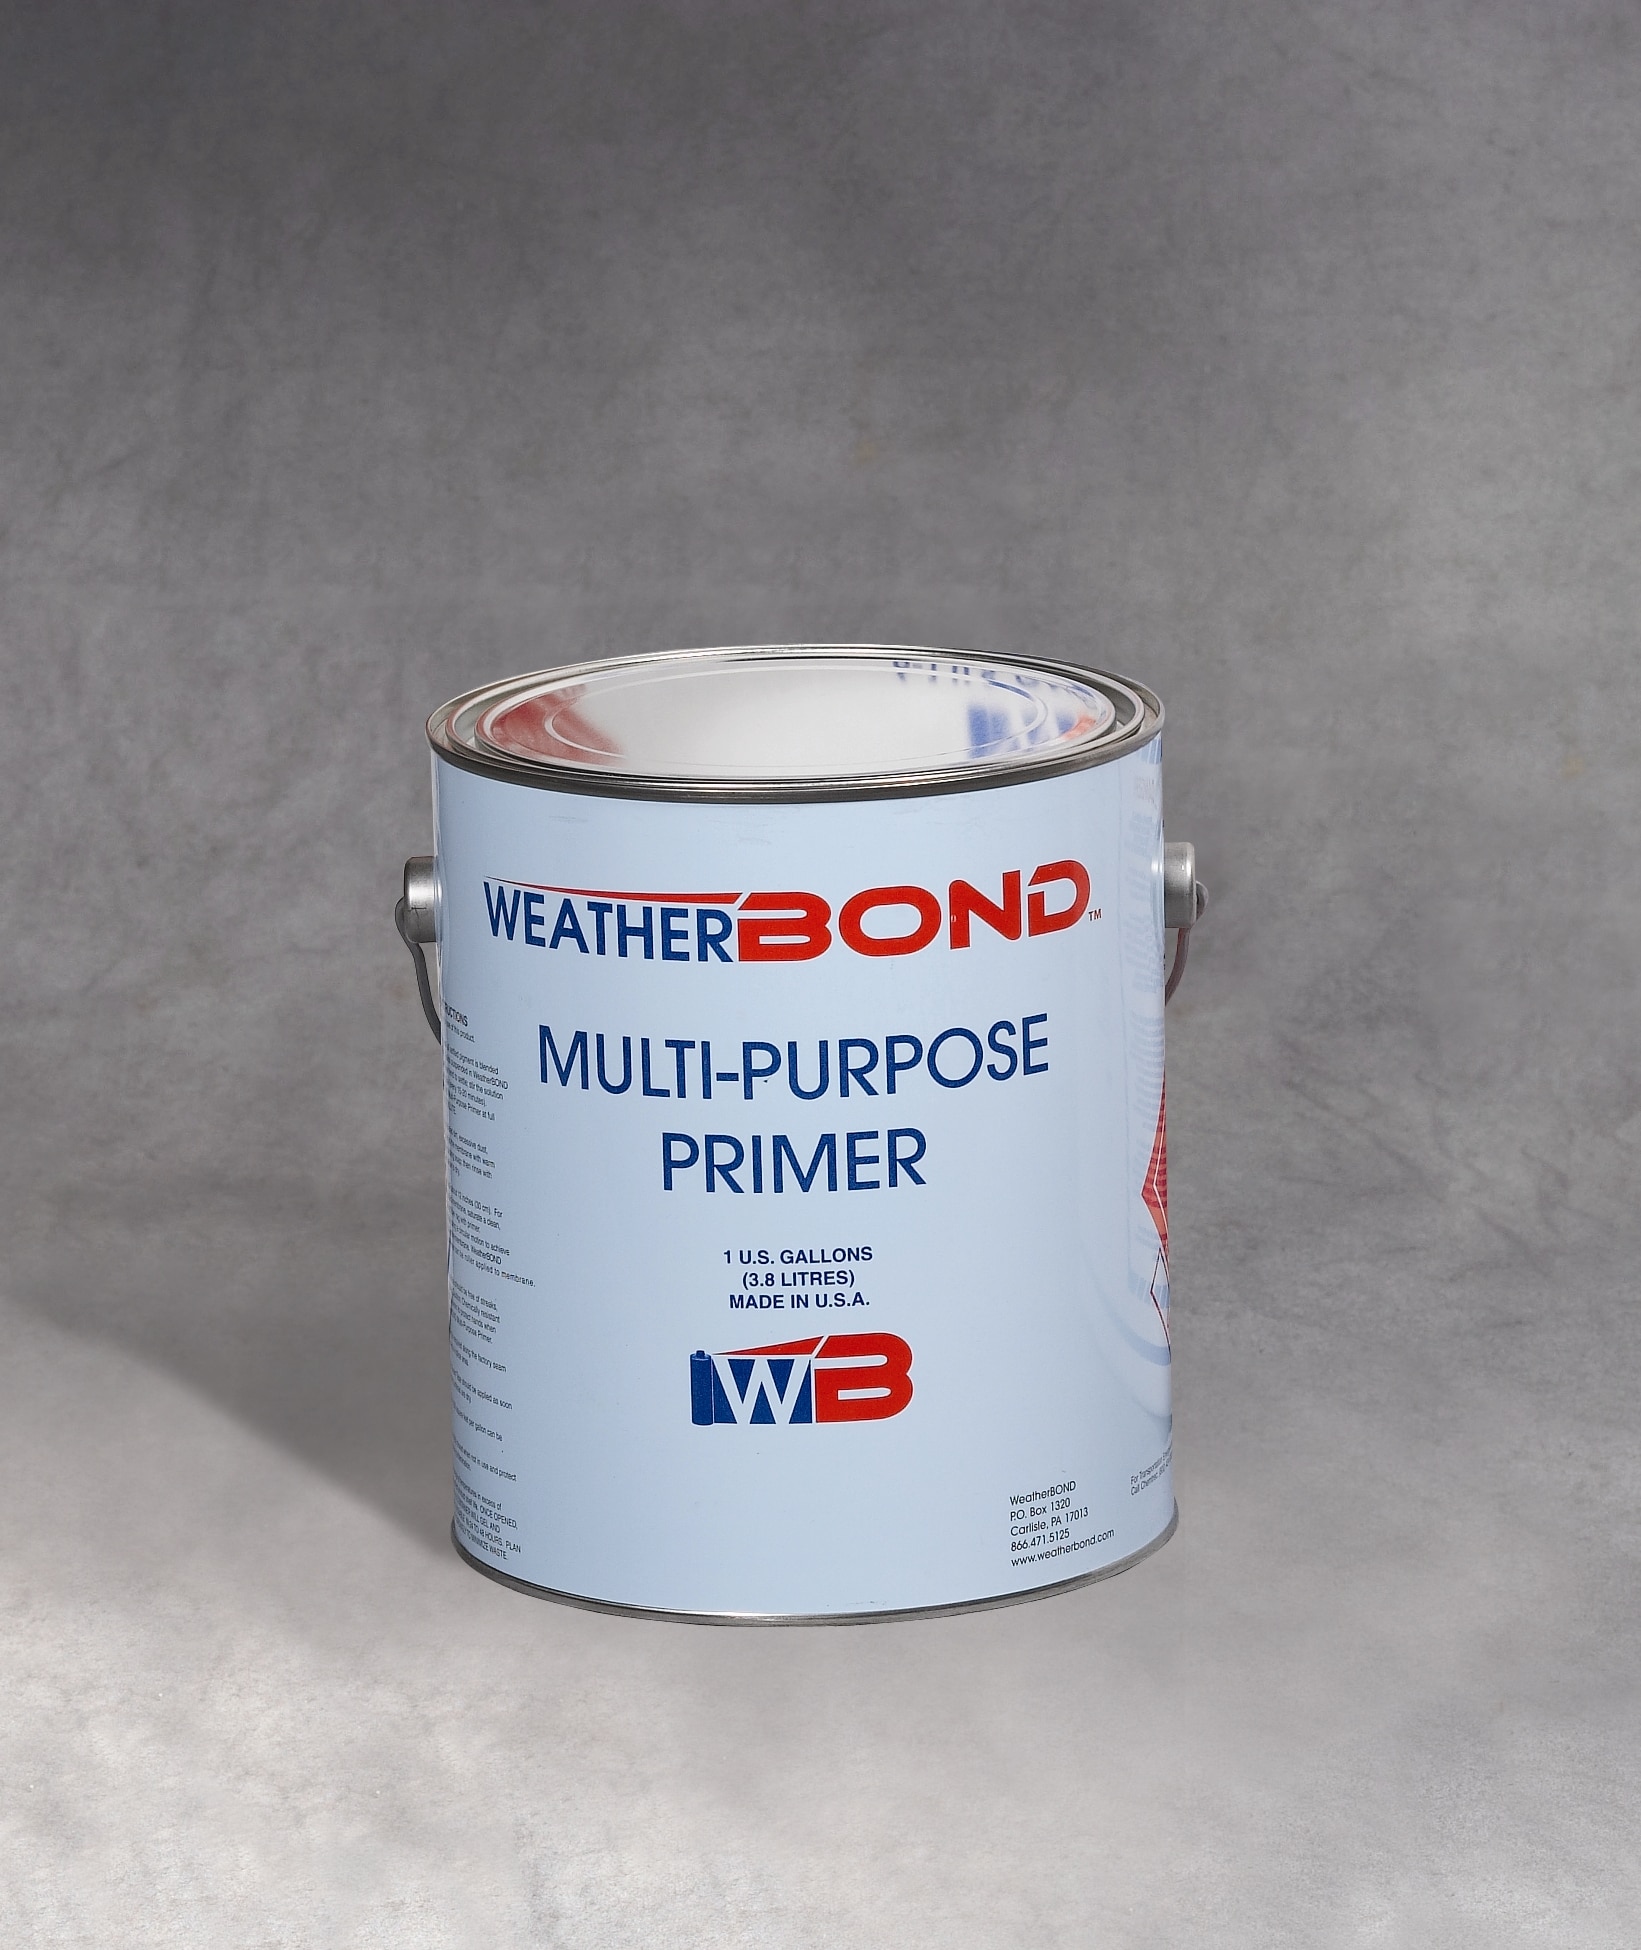 Weatherbond Double-Sided Seam Tape Kit - 3 x 100